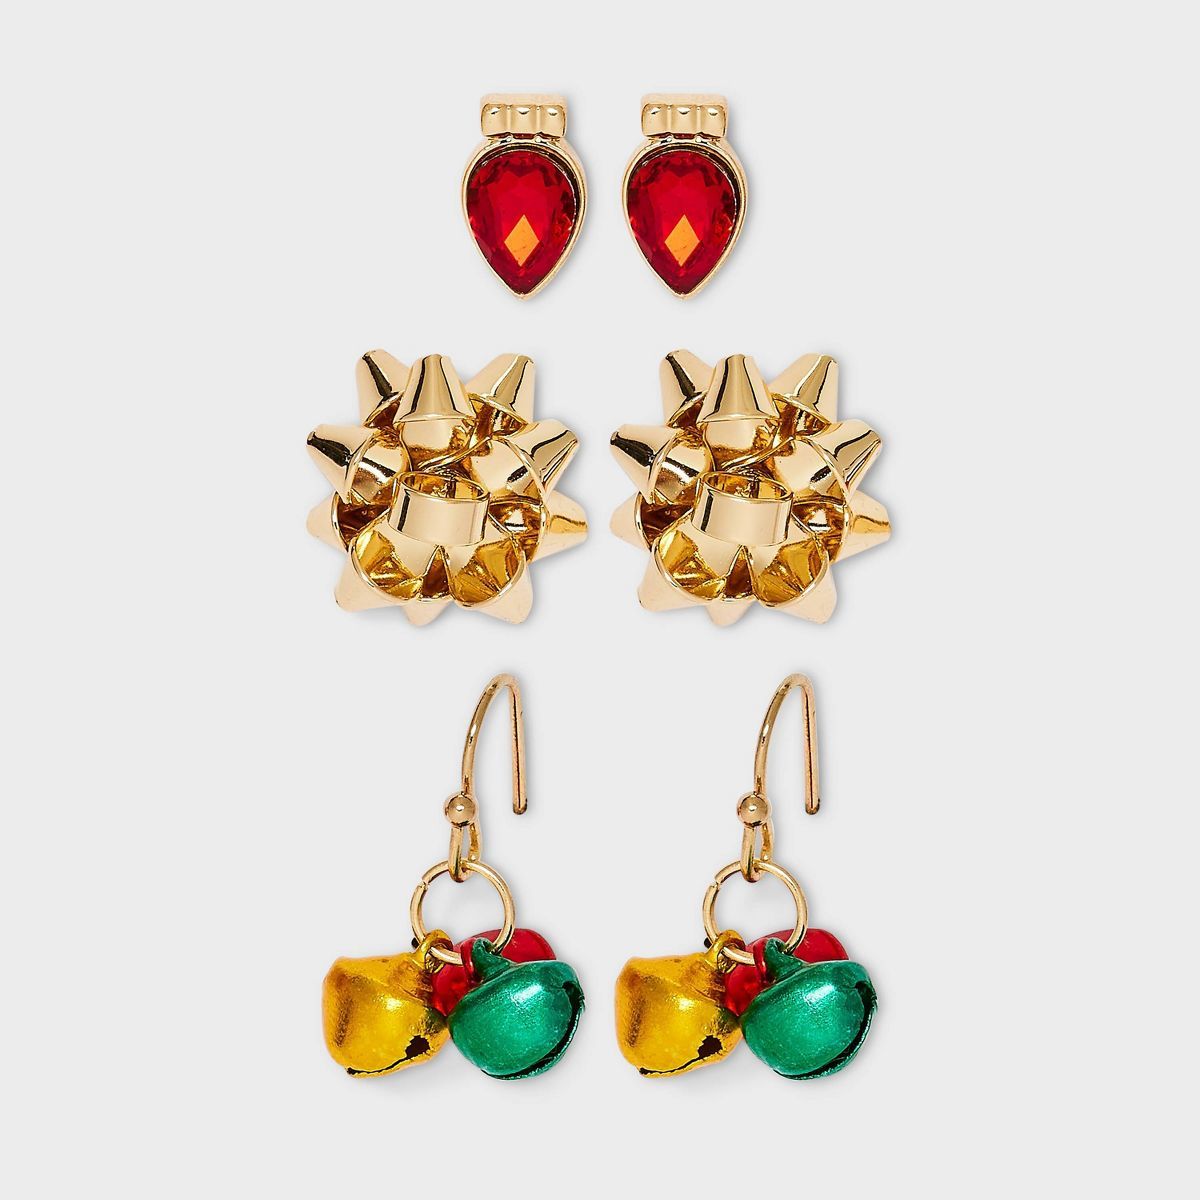 Bow Lightbulb and Jingle Bell Drop Earring Set 3pc - Gold/Red/Green | Target